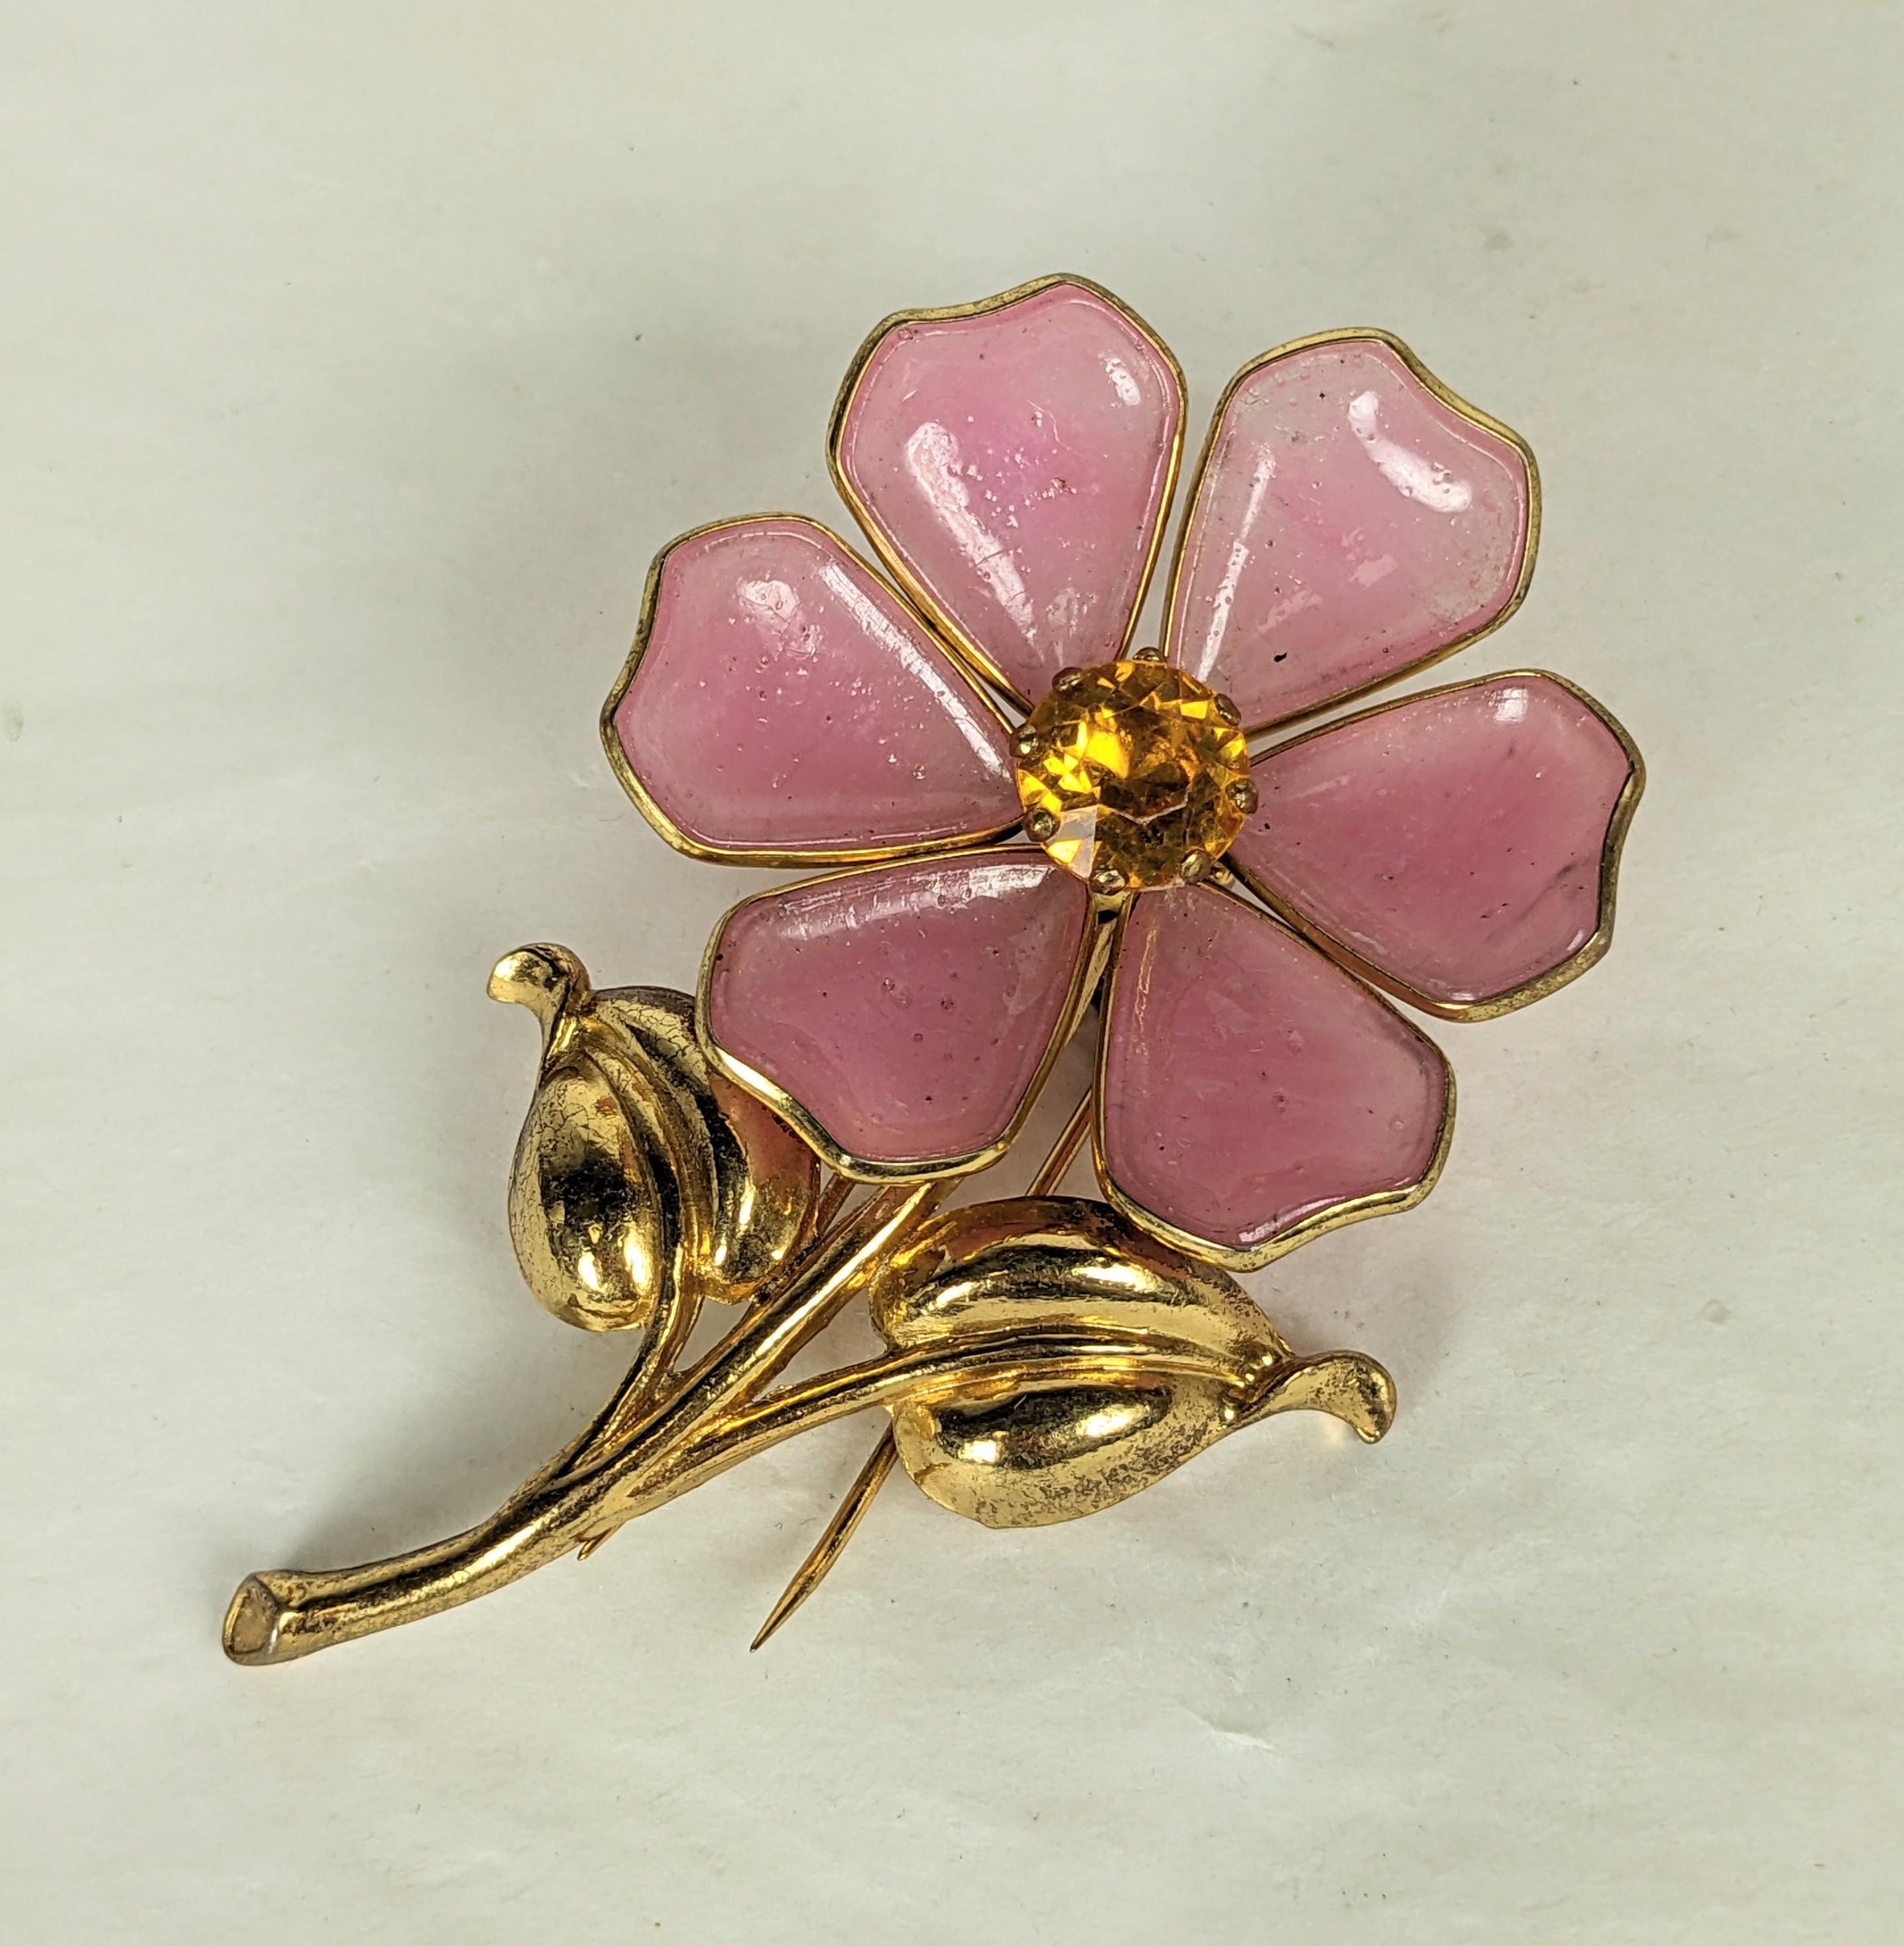 Impressive Art Deco Gripoix Style Pink Flower Clip from the 1930's. Pale pink glass petals are bezel set in brass with topaz crystal center set on gilt leaf base. A 1930's piece designed to emulate a period Chanel design. 1930's USA. 3